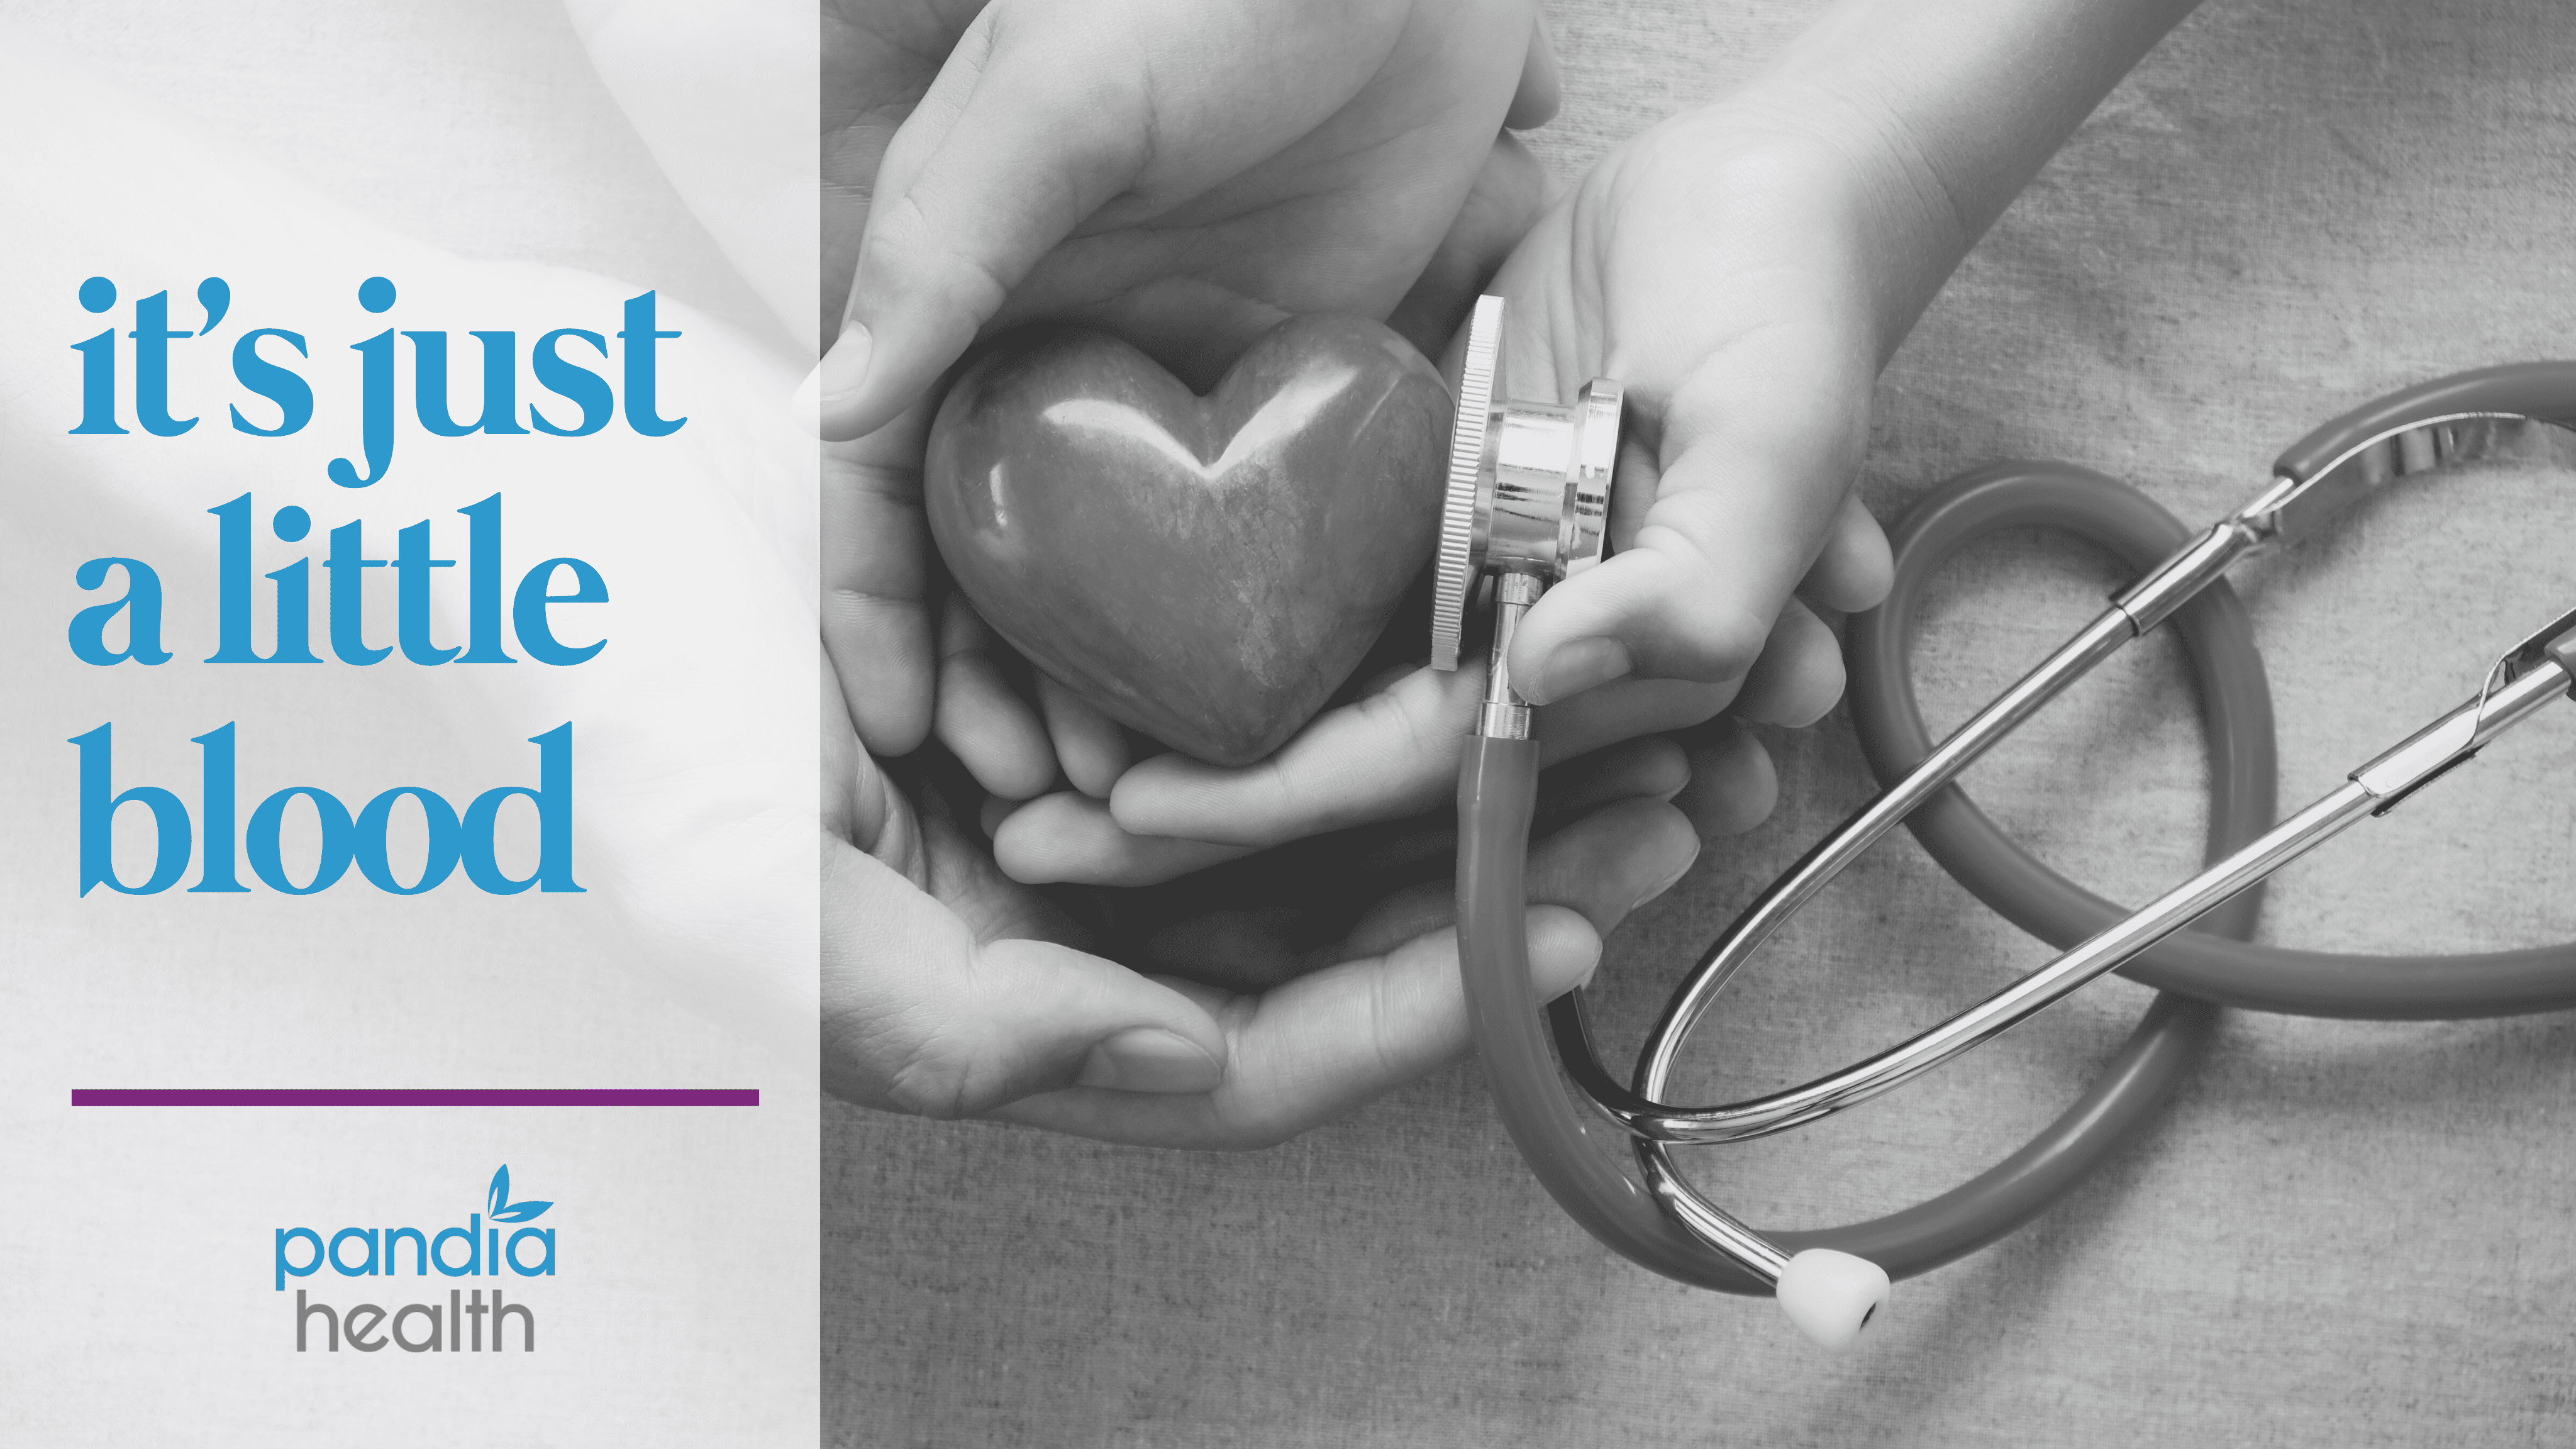 blog header image. parent and child's hands holding a heart shaped rock with a stethoscope pressed up to it.